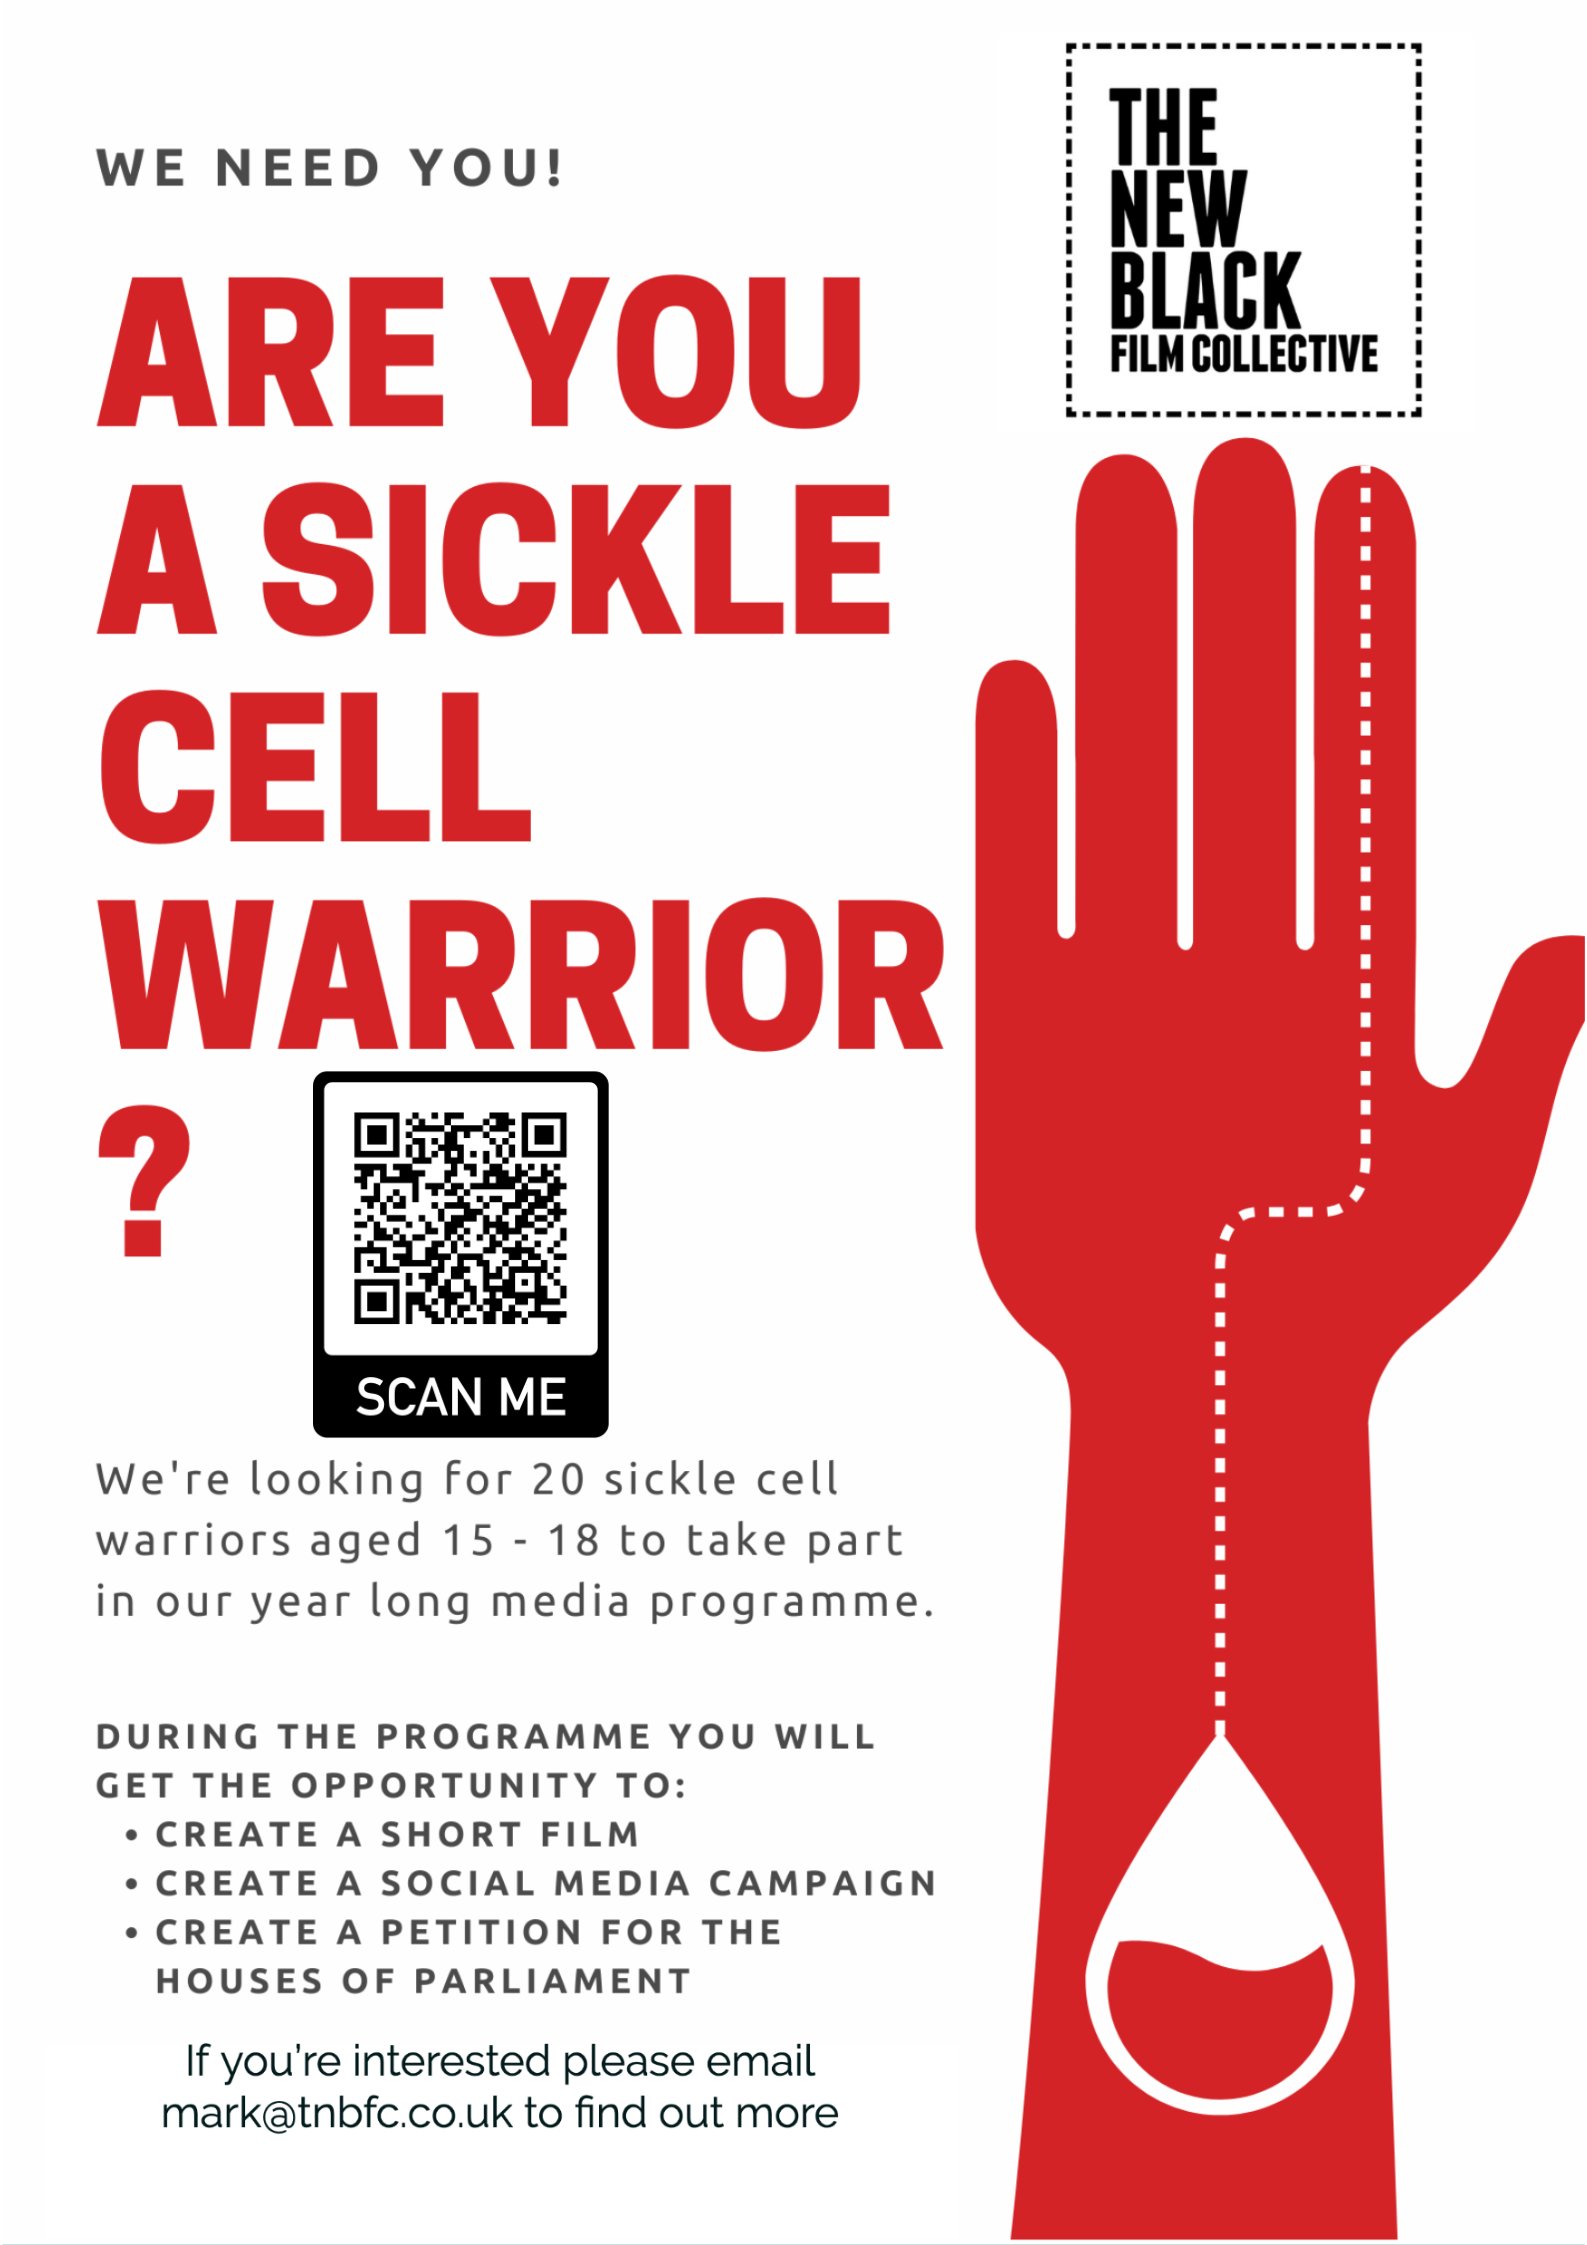 Are you a sickle warrior